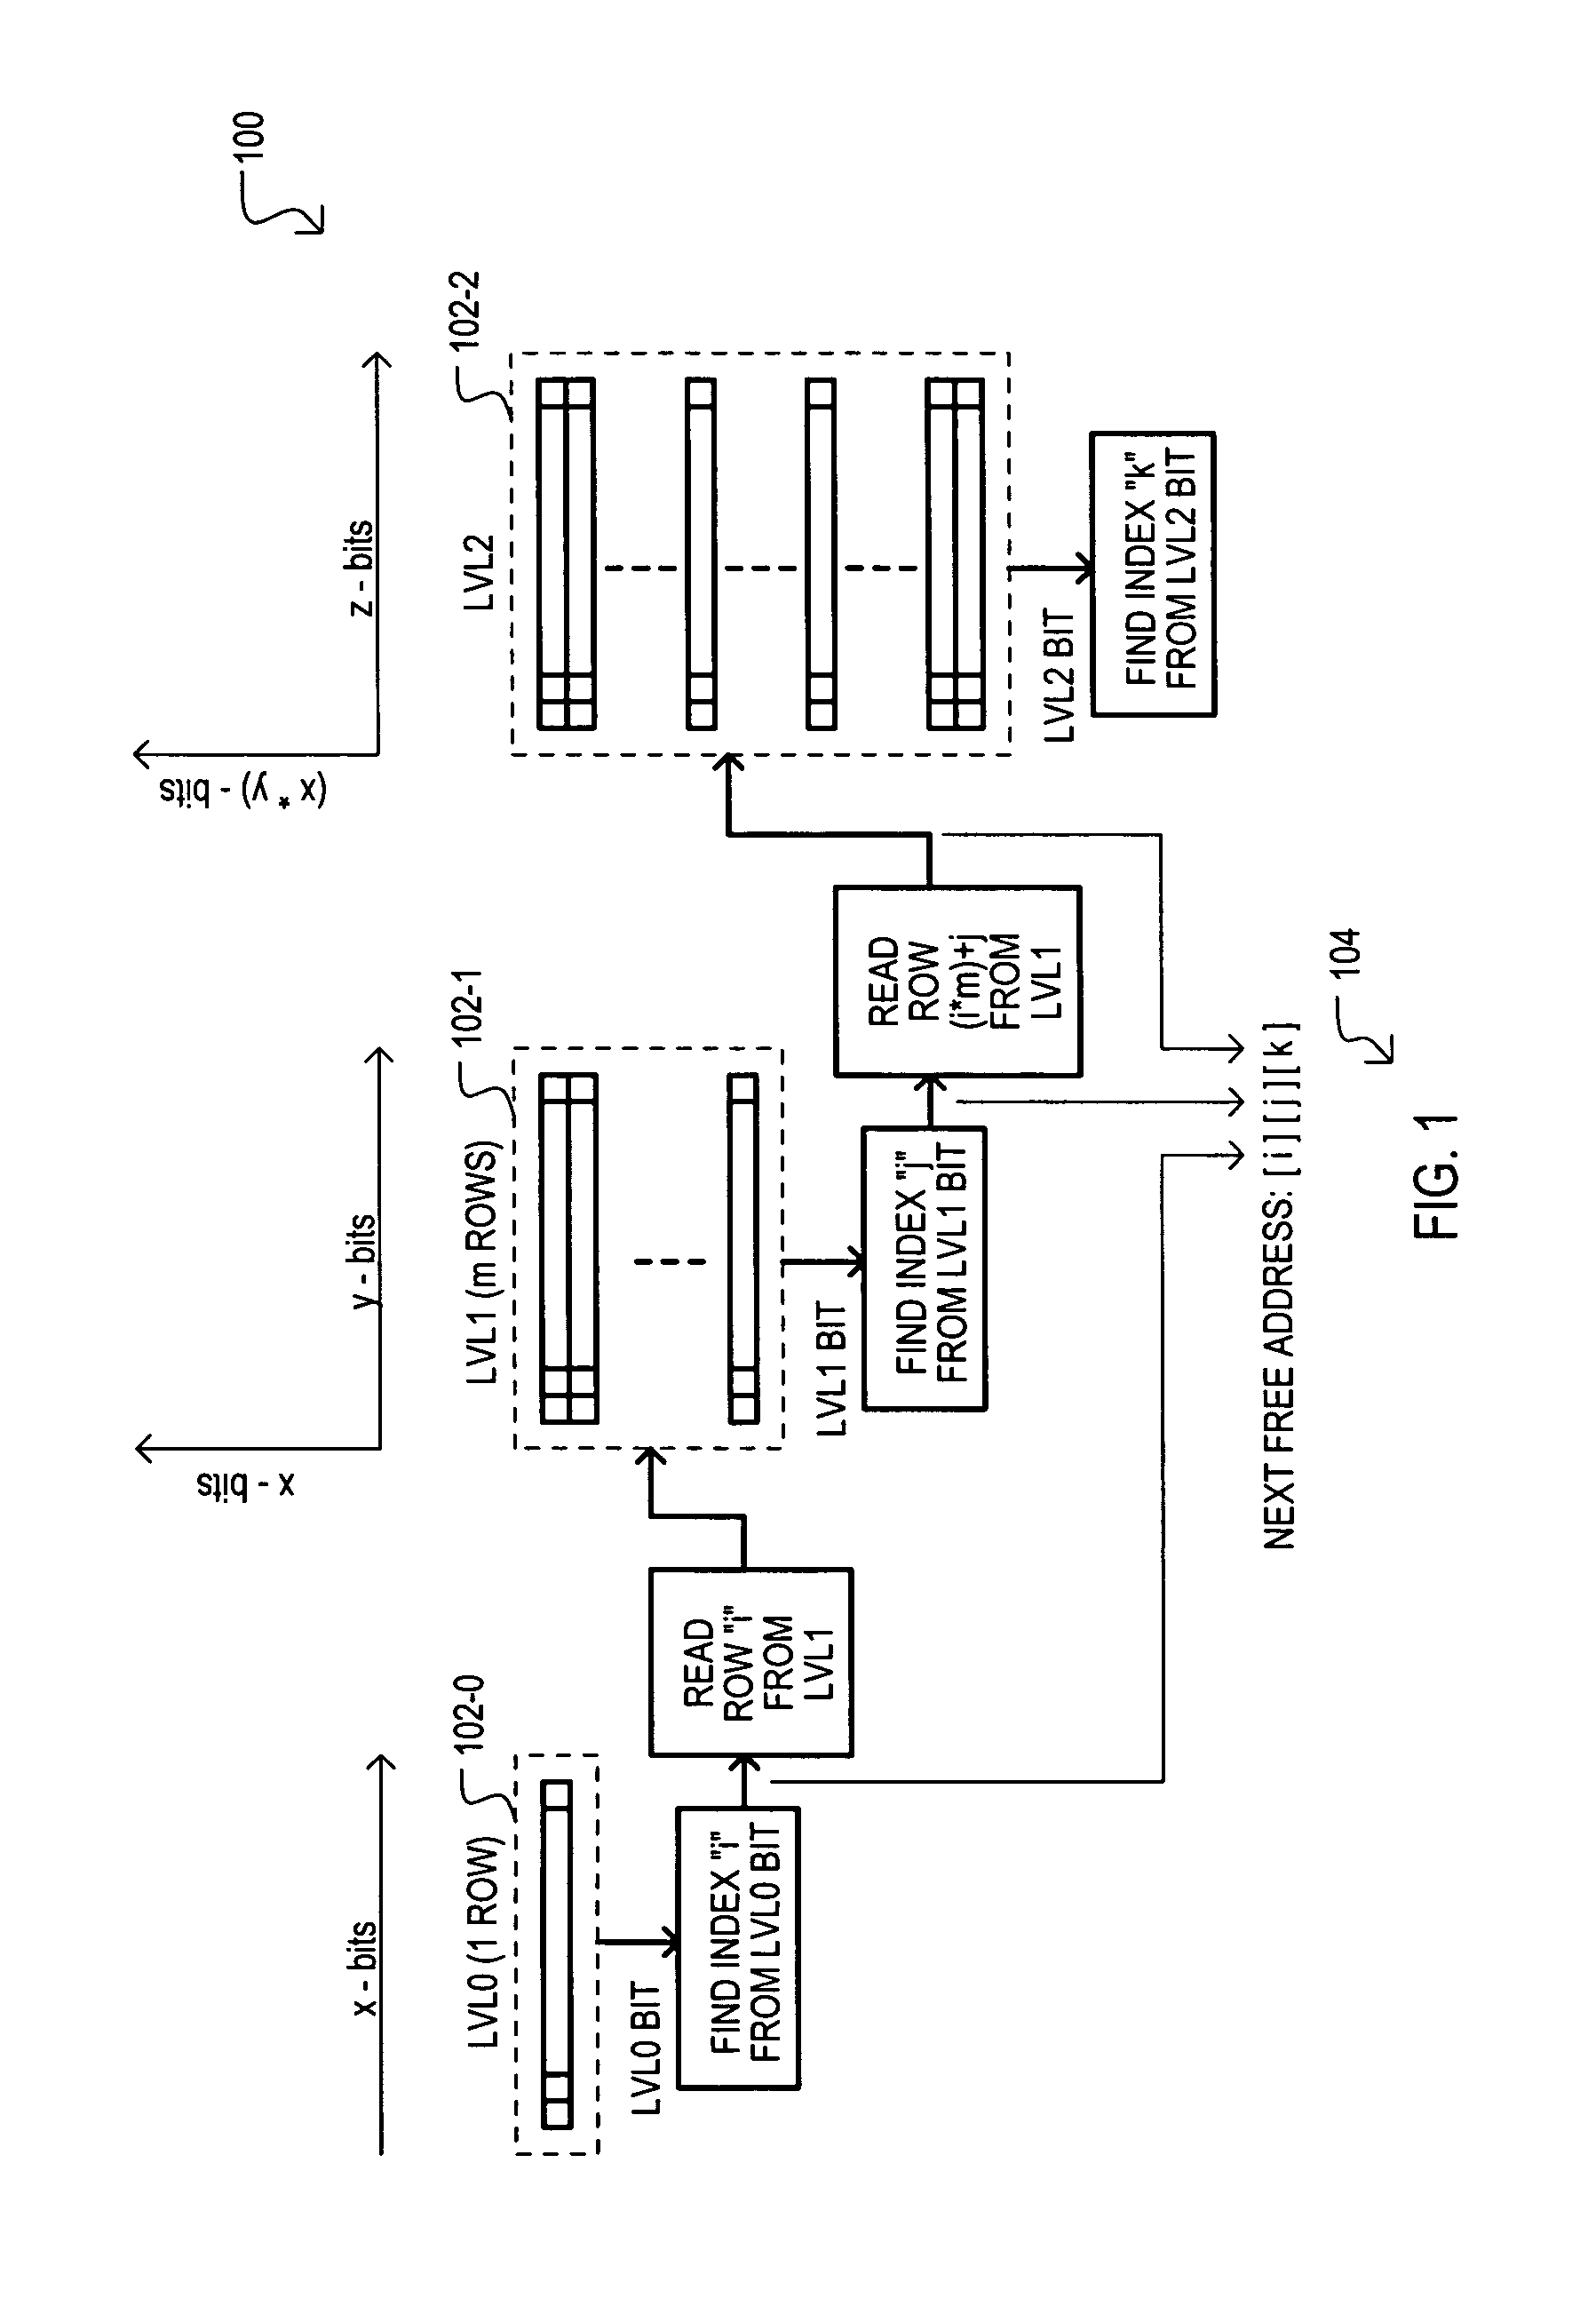 Method and apparatus for learn and related operations in network search engine